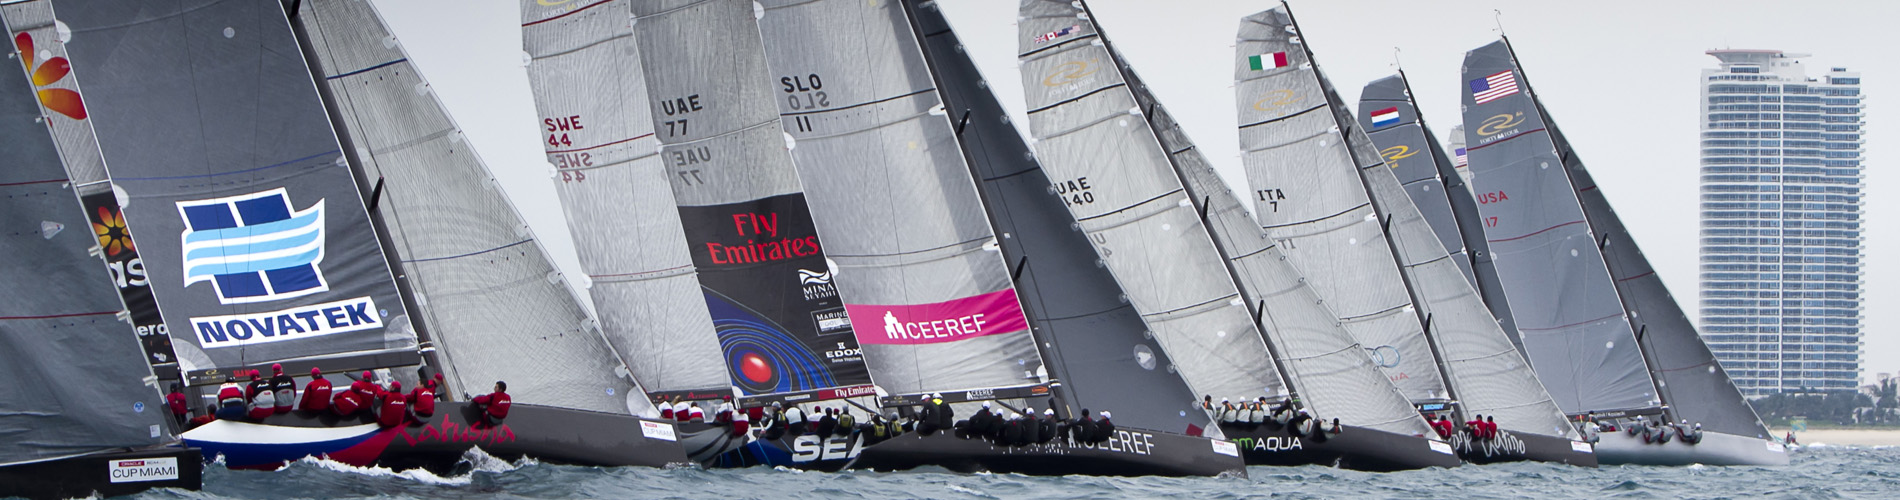 YachtBot GPS being used in America's Cup Race